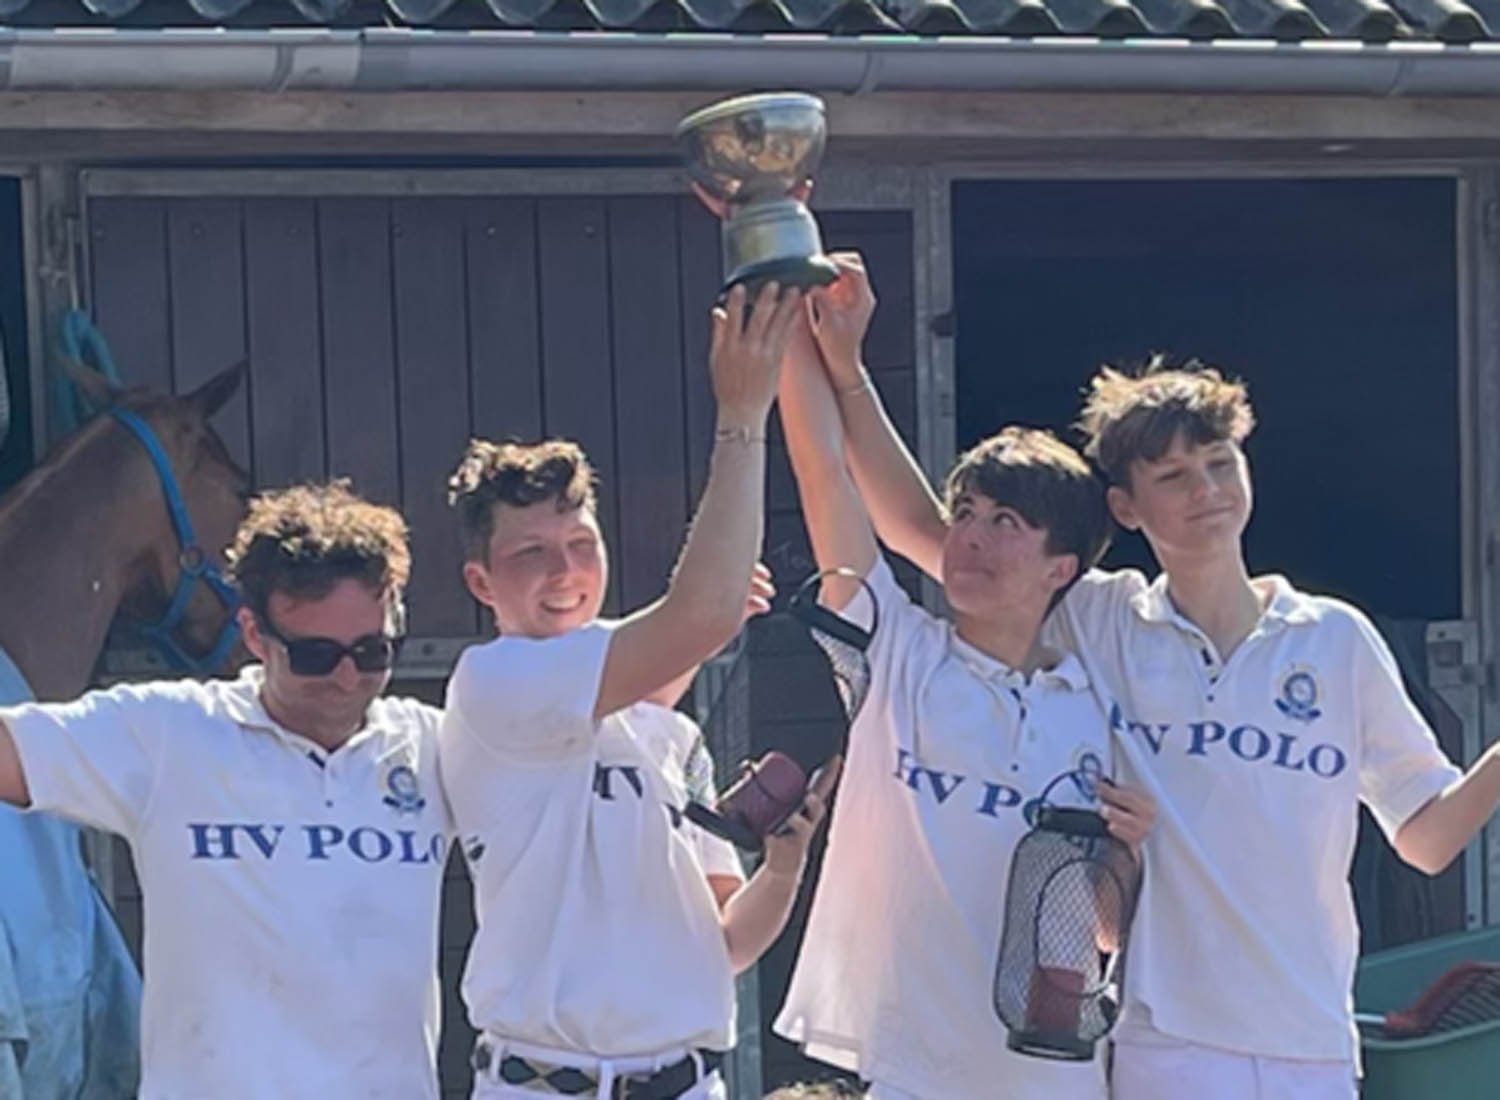 HV POLO wins the Duindigt Polo Cup 2022 !